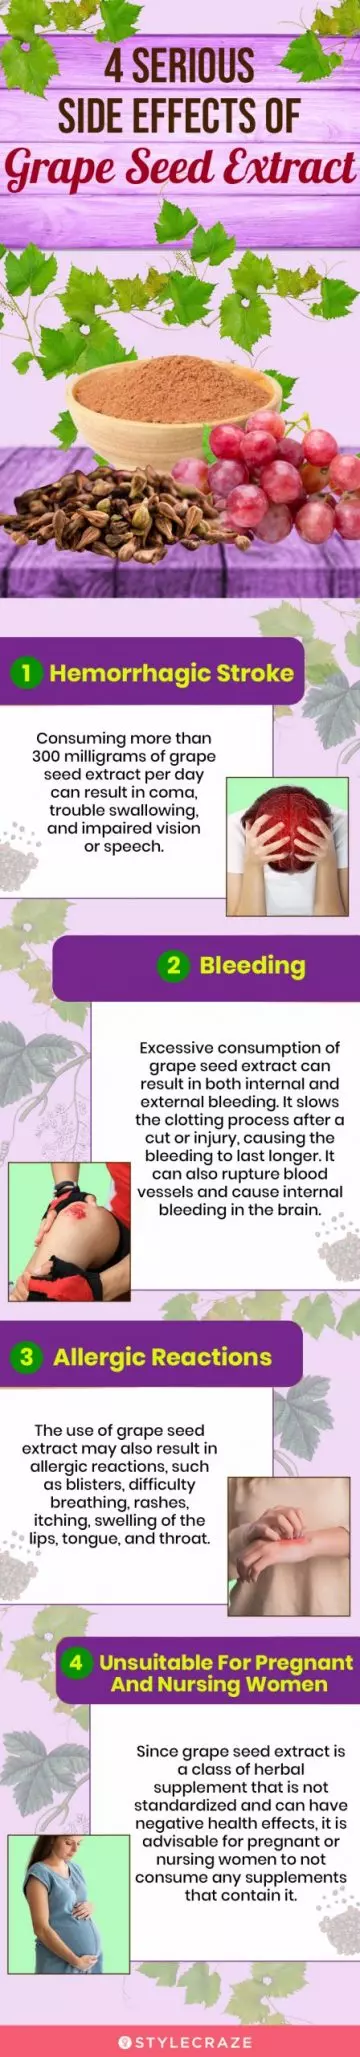 4 serious side effects of grape seed extract (infographic)